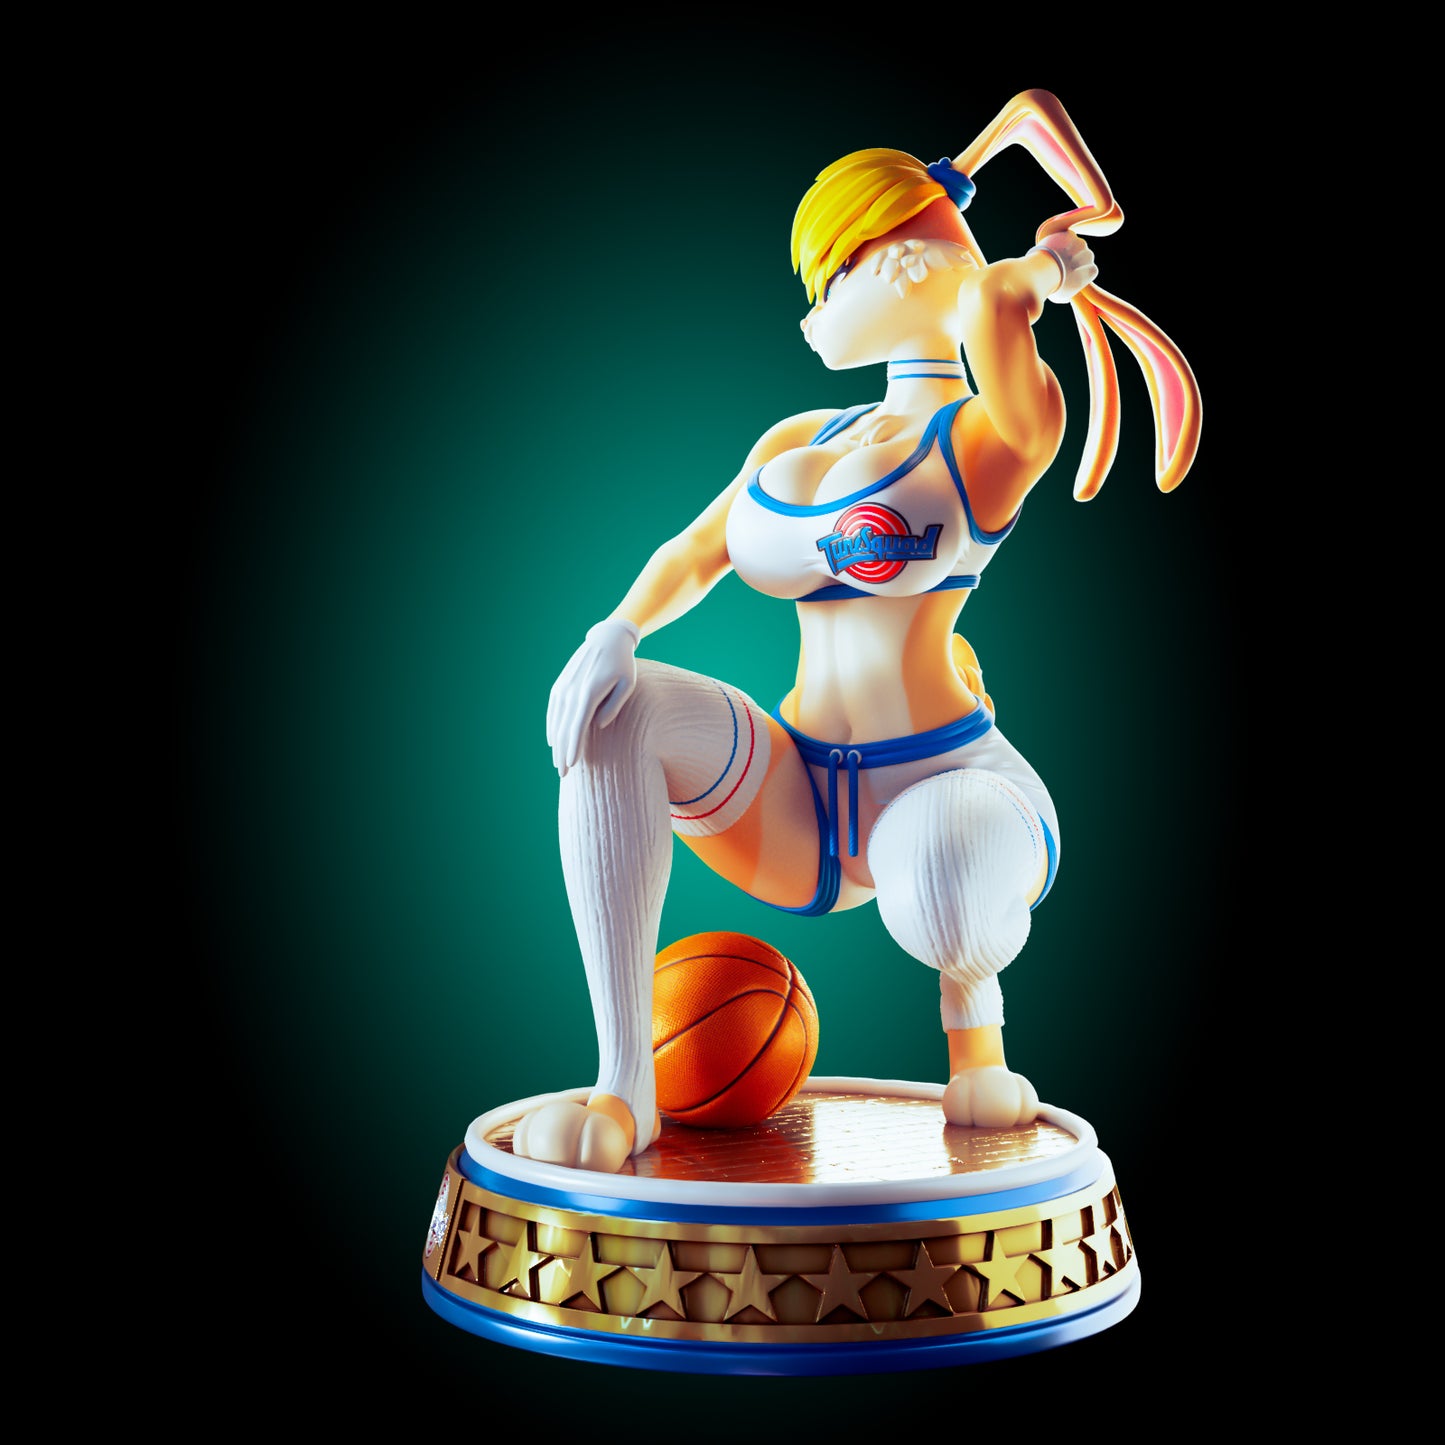 Lola The Bunny | Lola Bunny from the Toon Squad | Space Jam from Officer Rhu (FUTA editions are now available for all ADULT figures) Model Kit for painting and collecting.